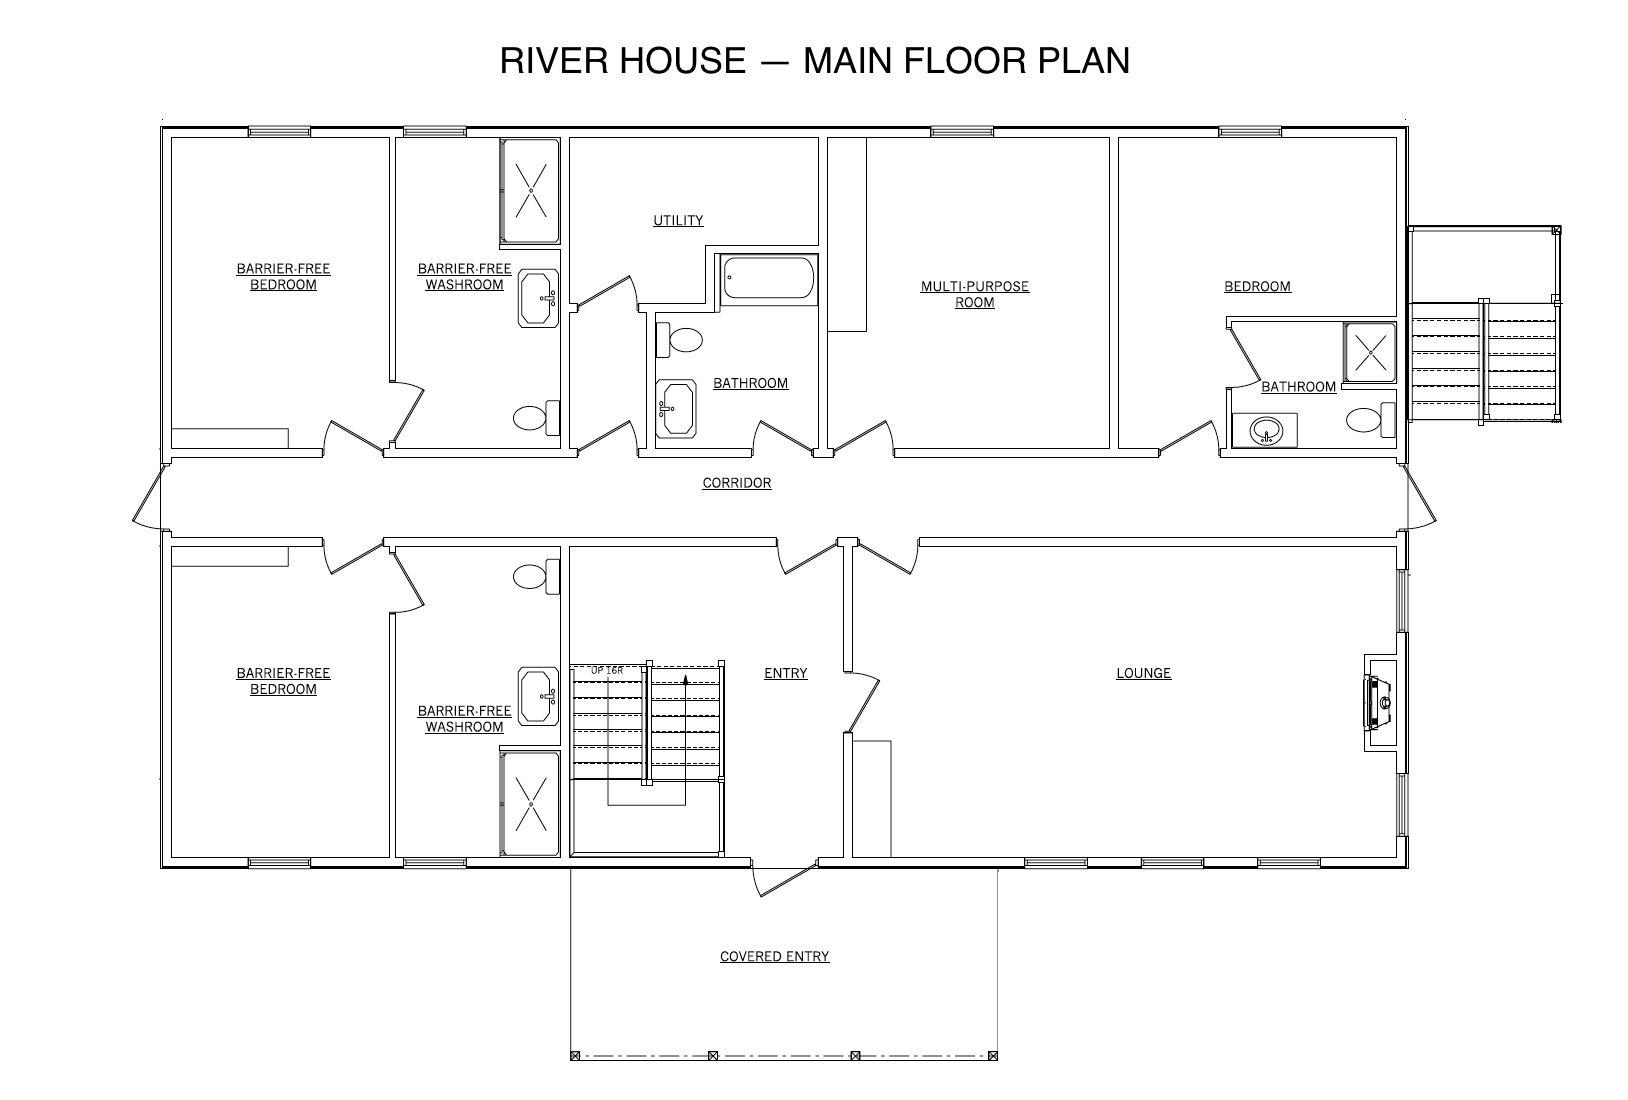 floor plans for the main floor of the River House